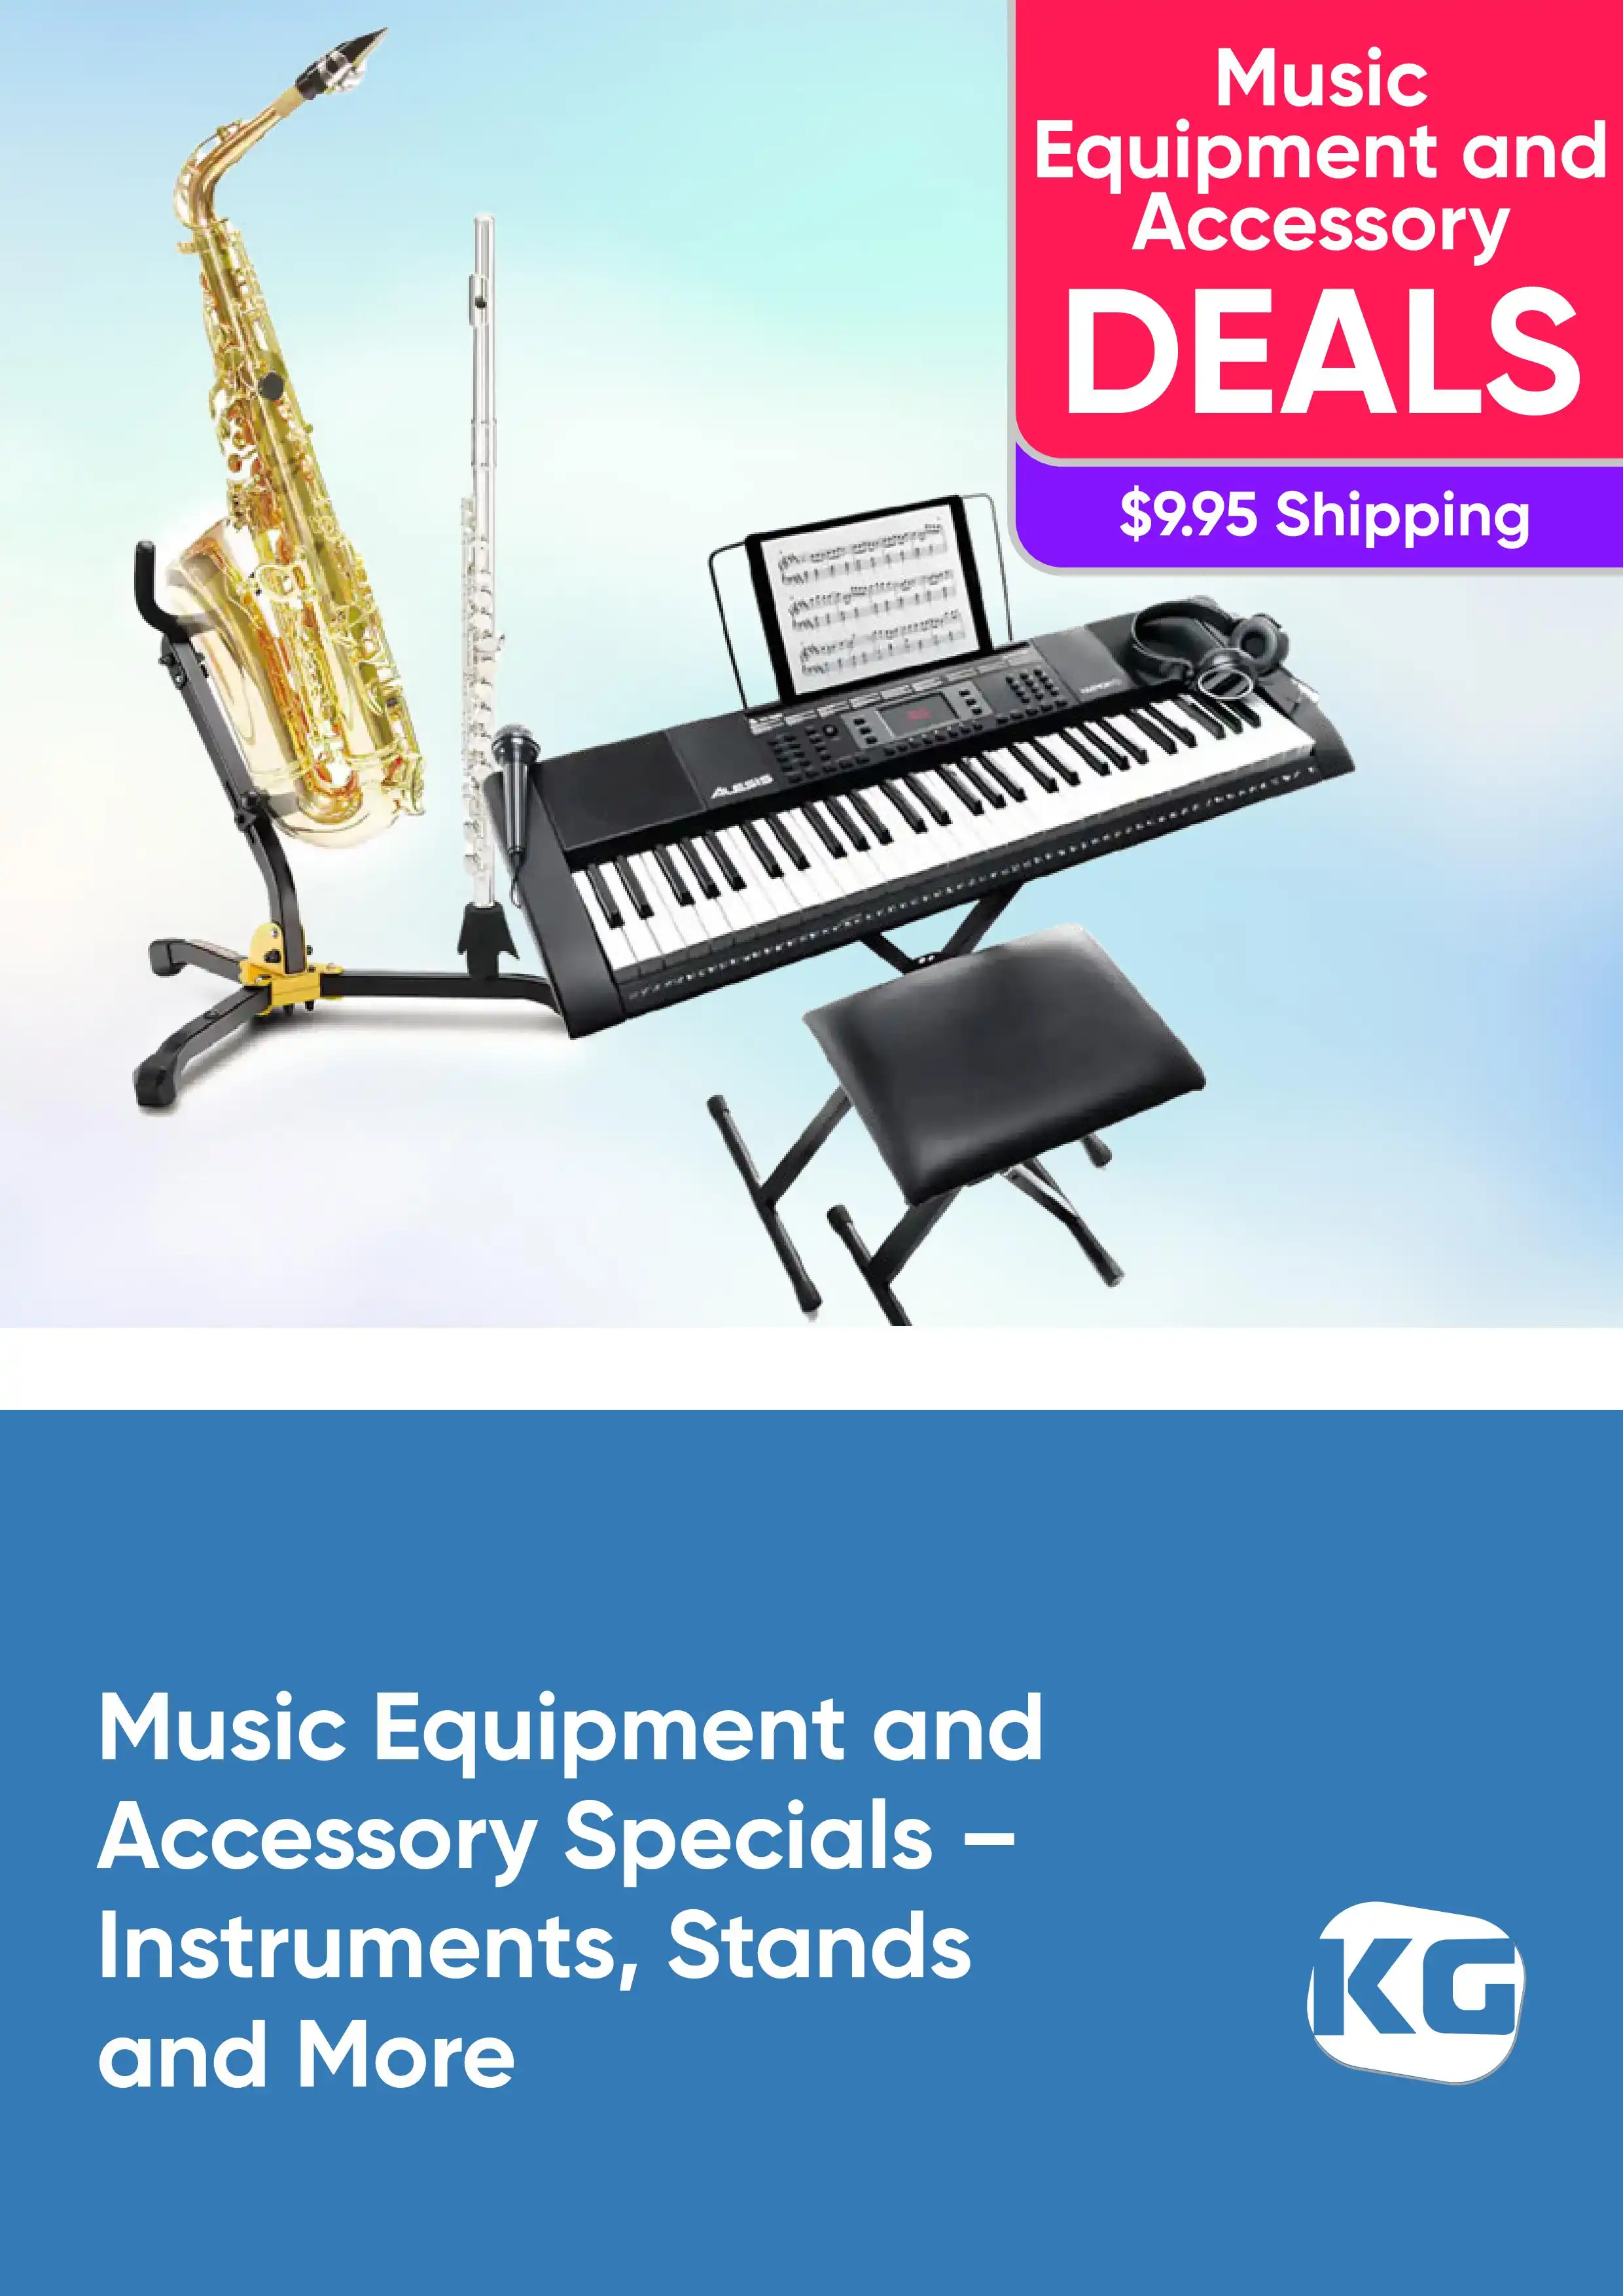 Music Equipment and Accessory Specials - Instruments, Stands and More